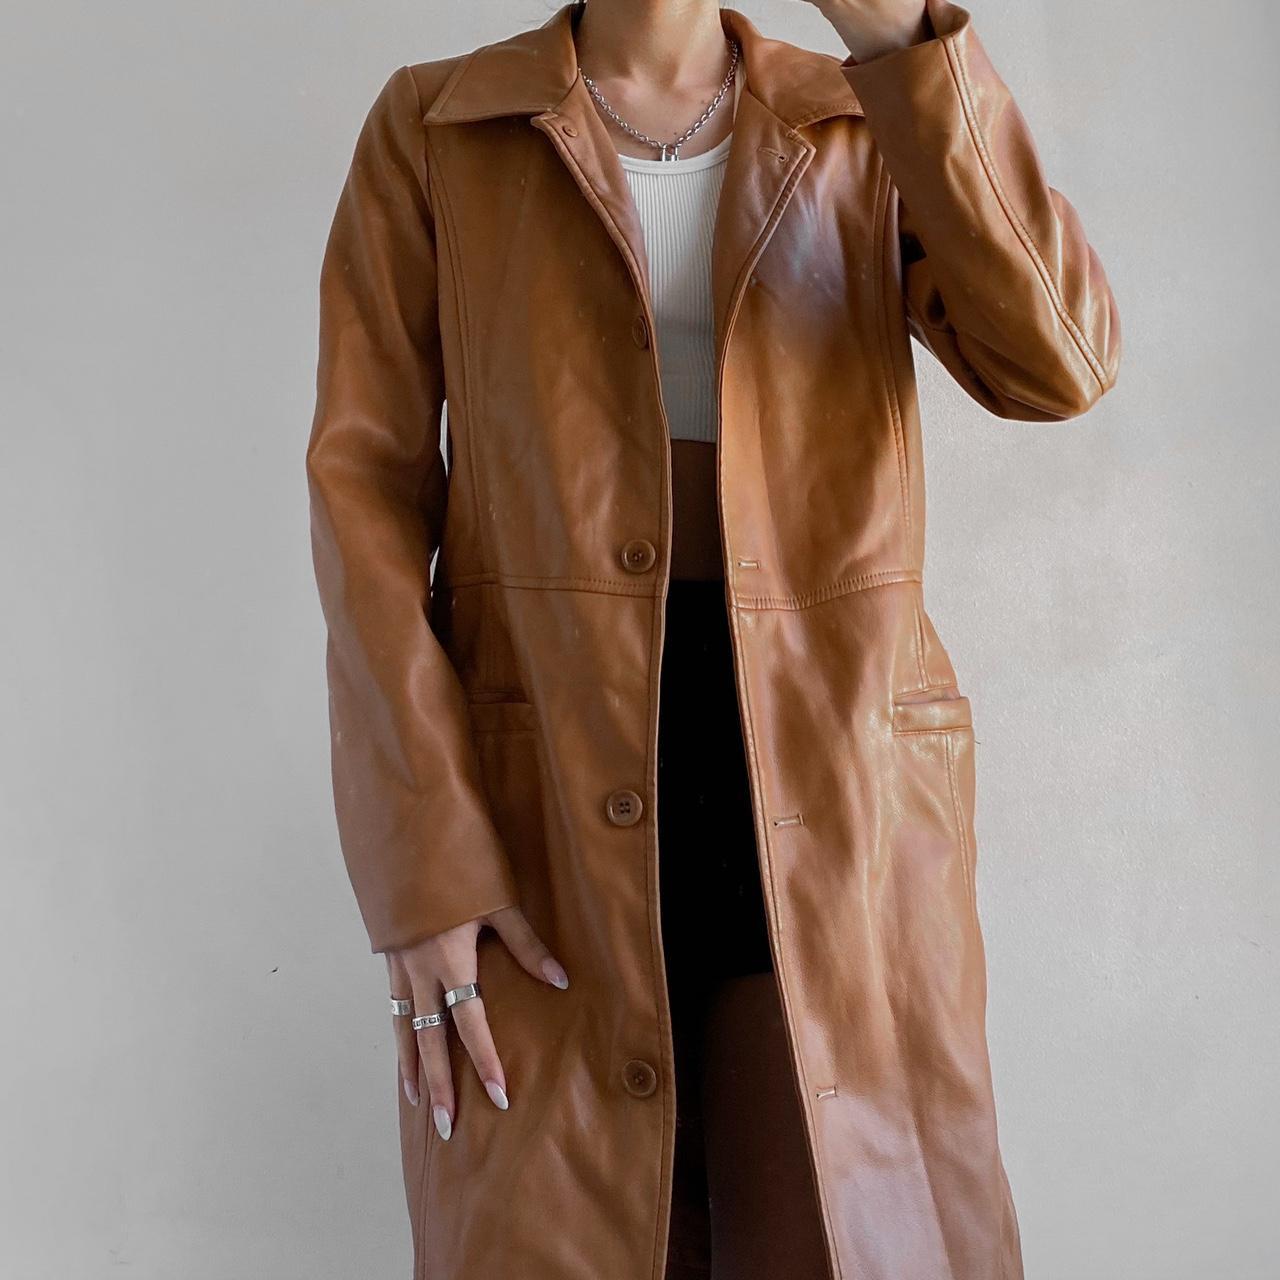 Urban Outfitters Women's Brown and Tan Coat (3)